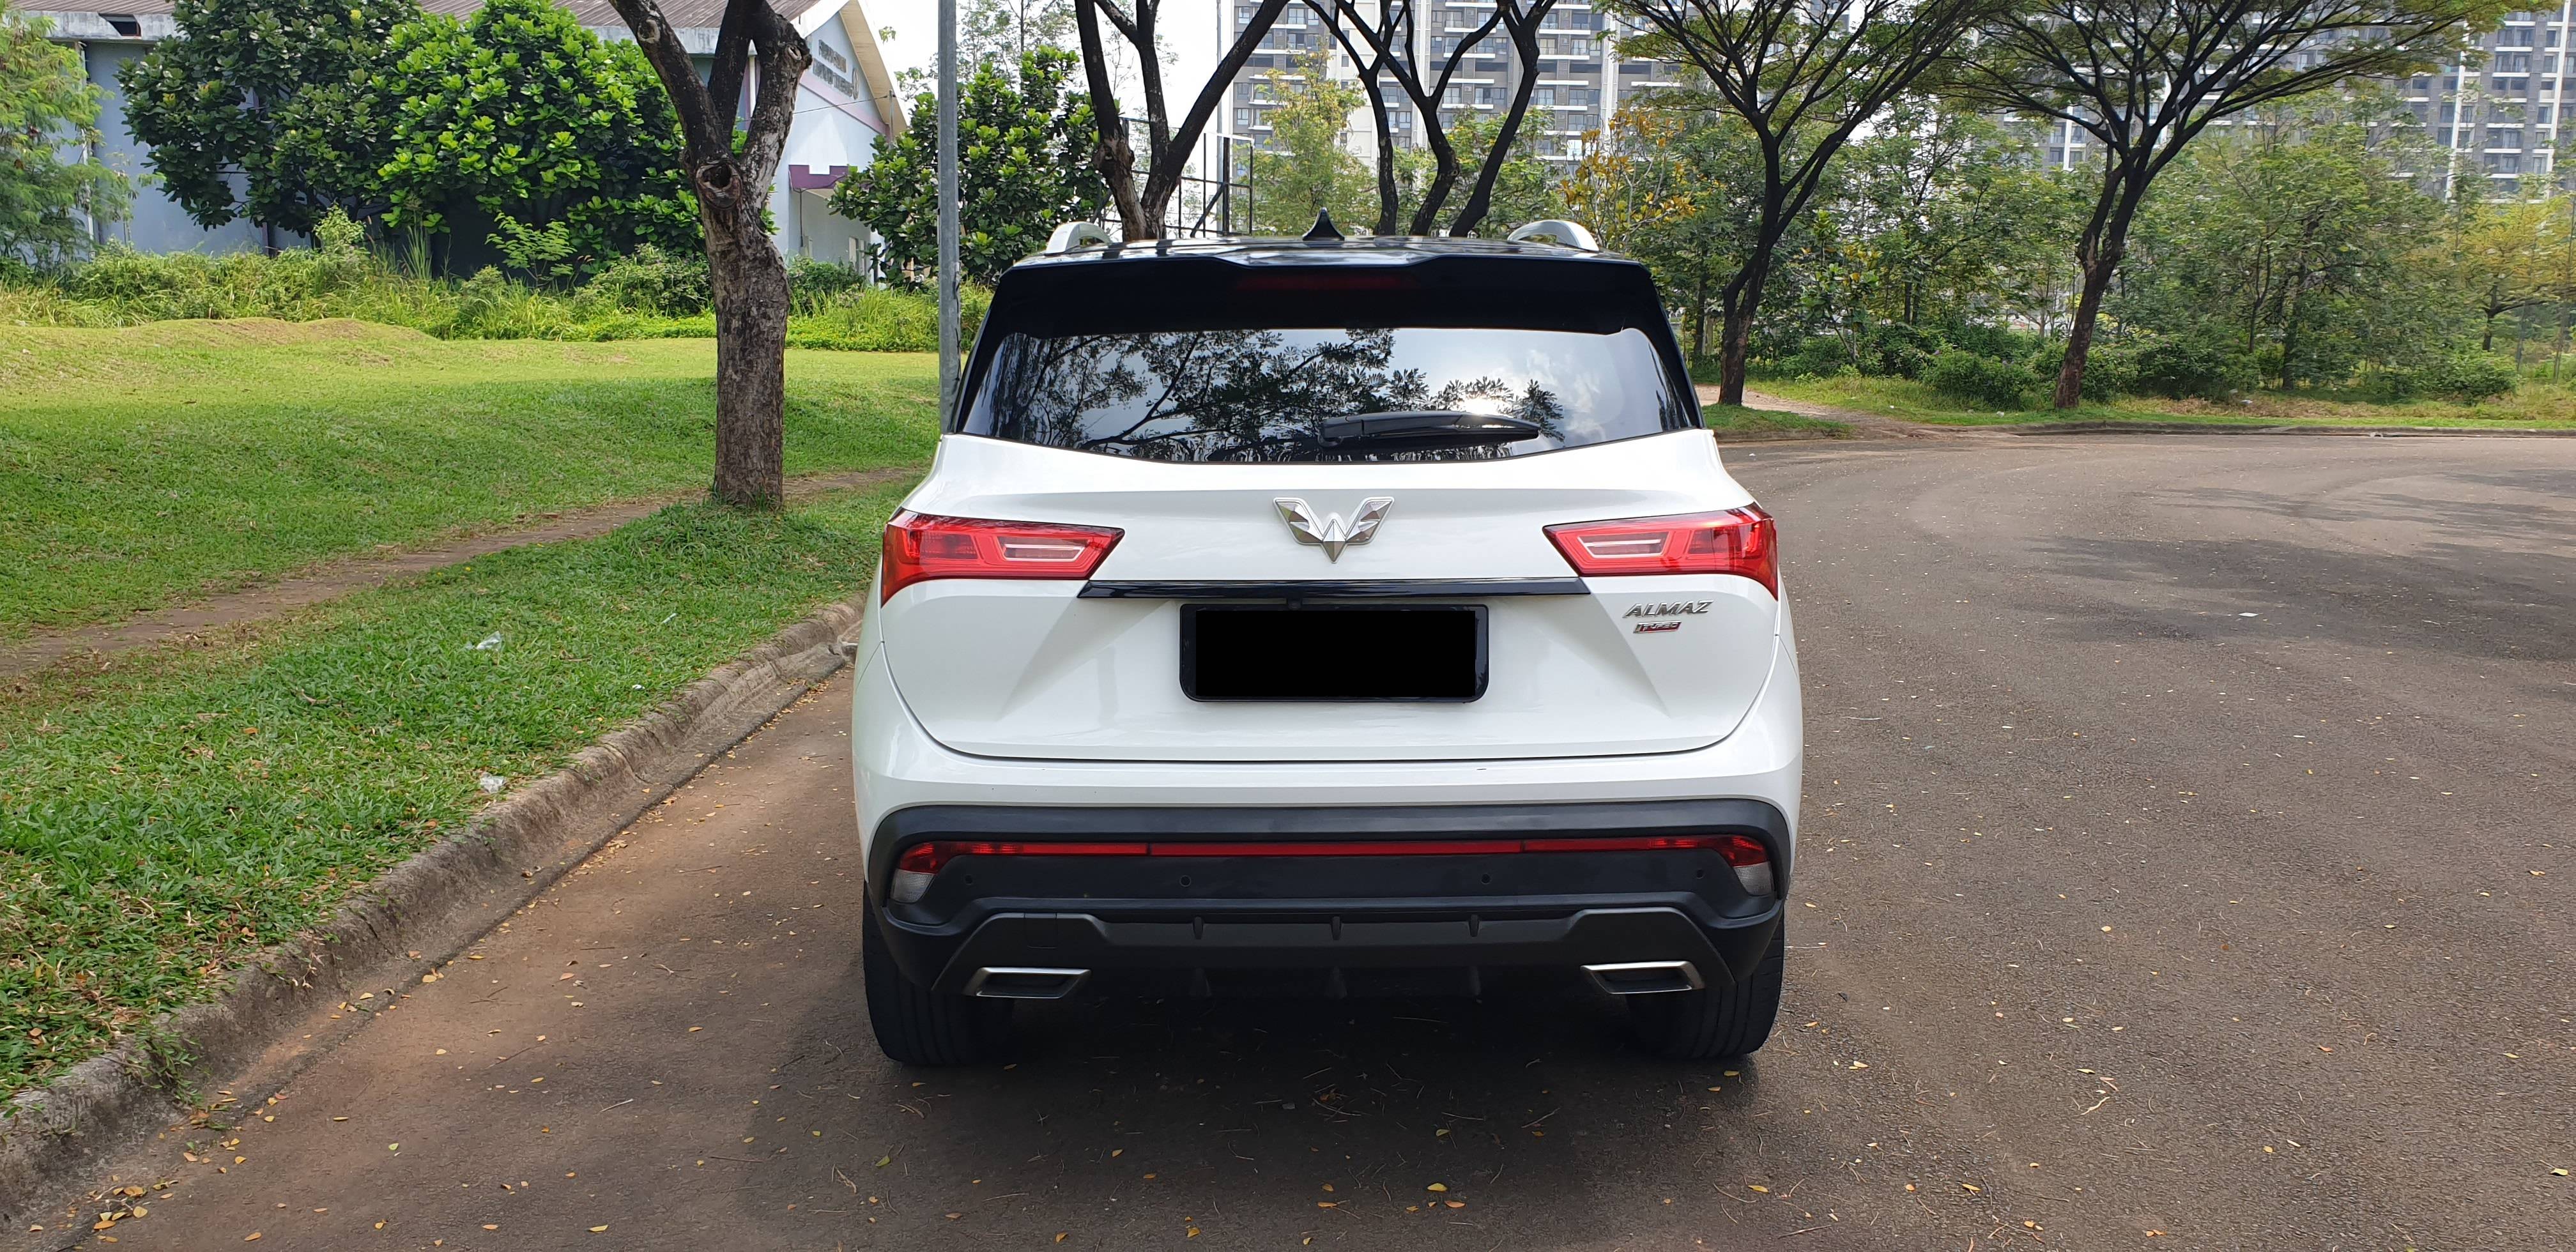 Used 2019 Wuling Almaz 1.5 T LUX CVT 1.5 T LUX CVT for sale